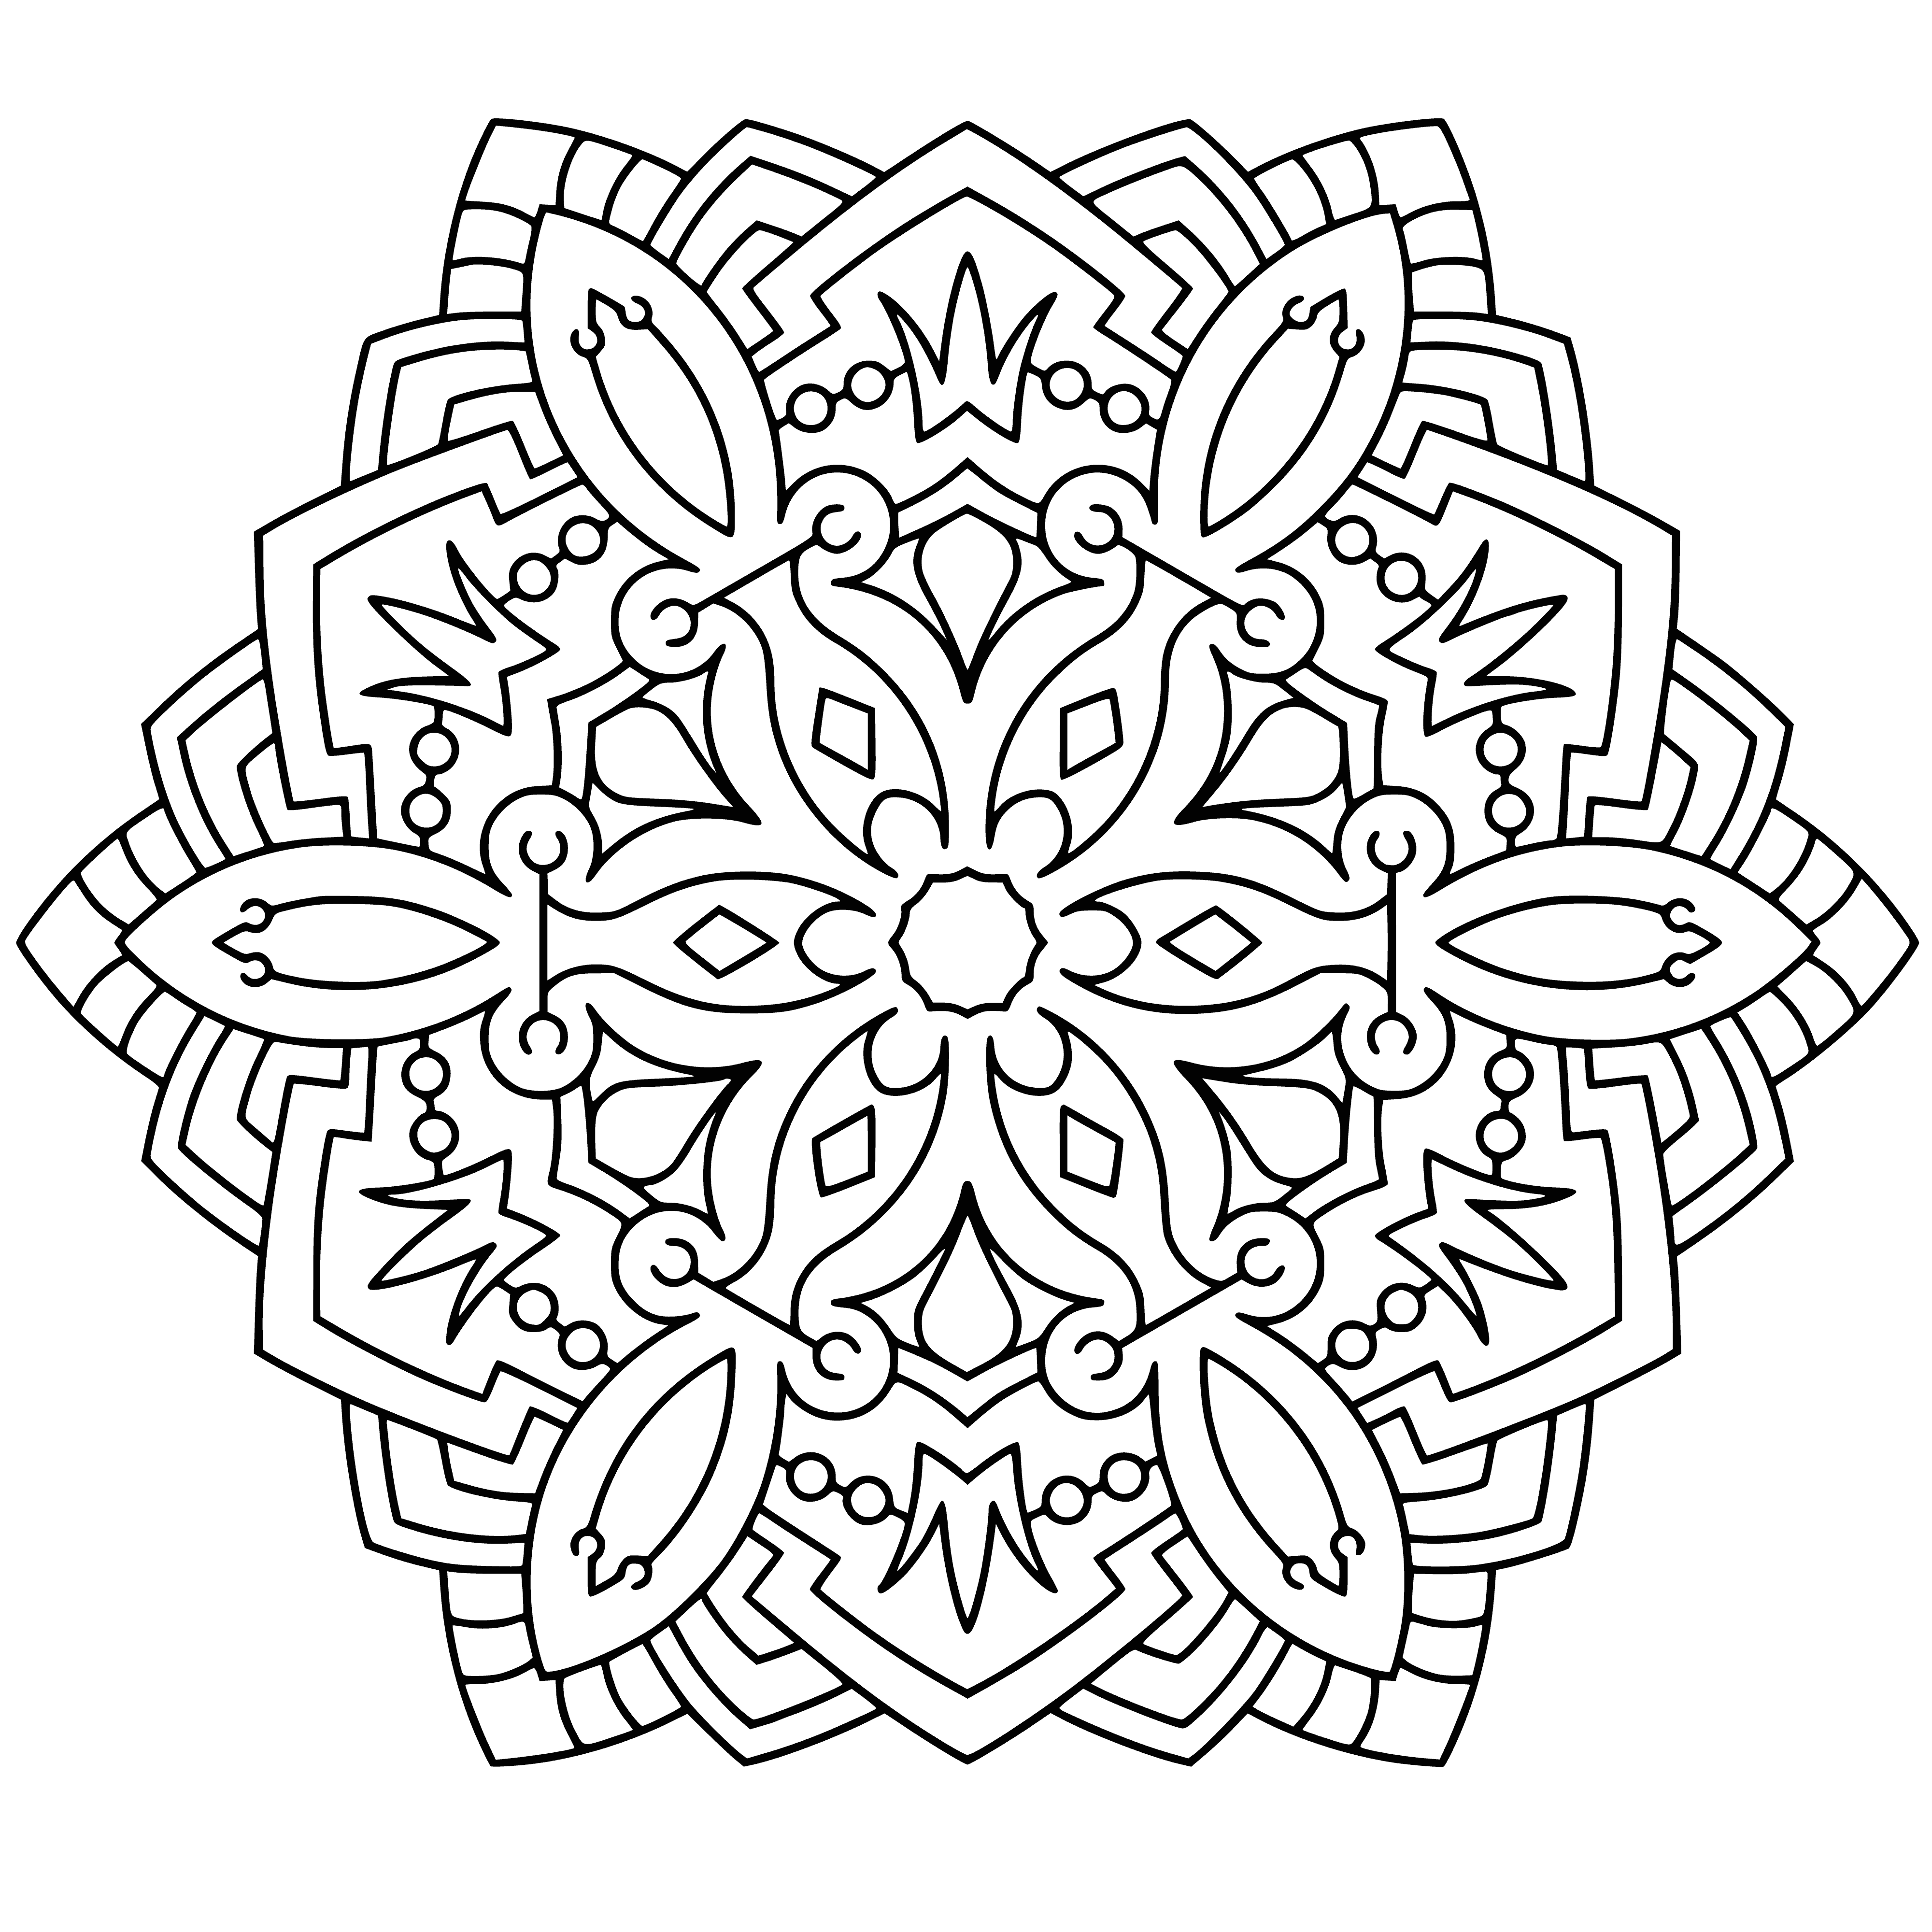 coloring page: Creating and coloring Mandala designs is a fun, relaxing way to engage the mind and relieve stress.